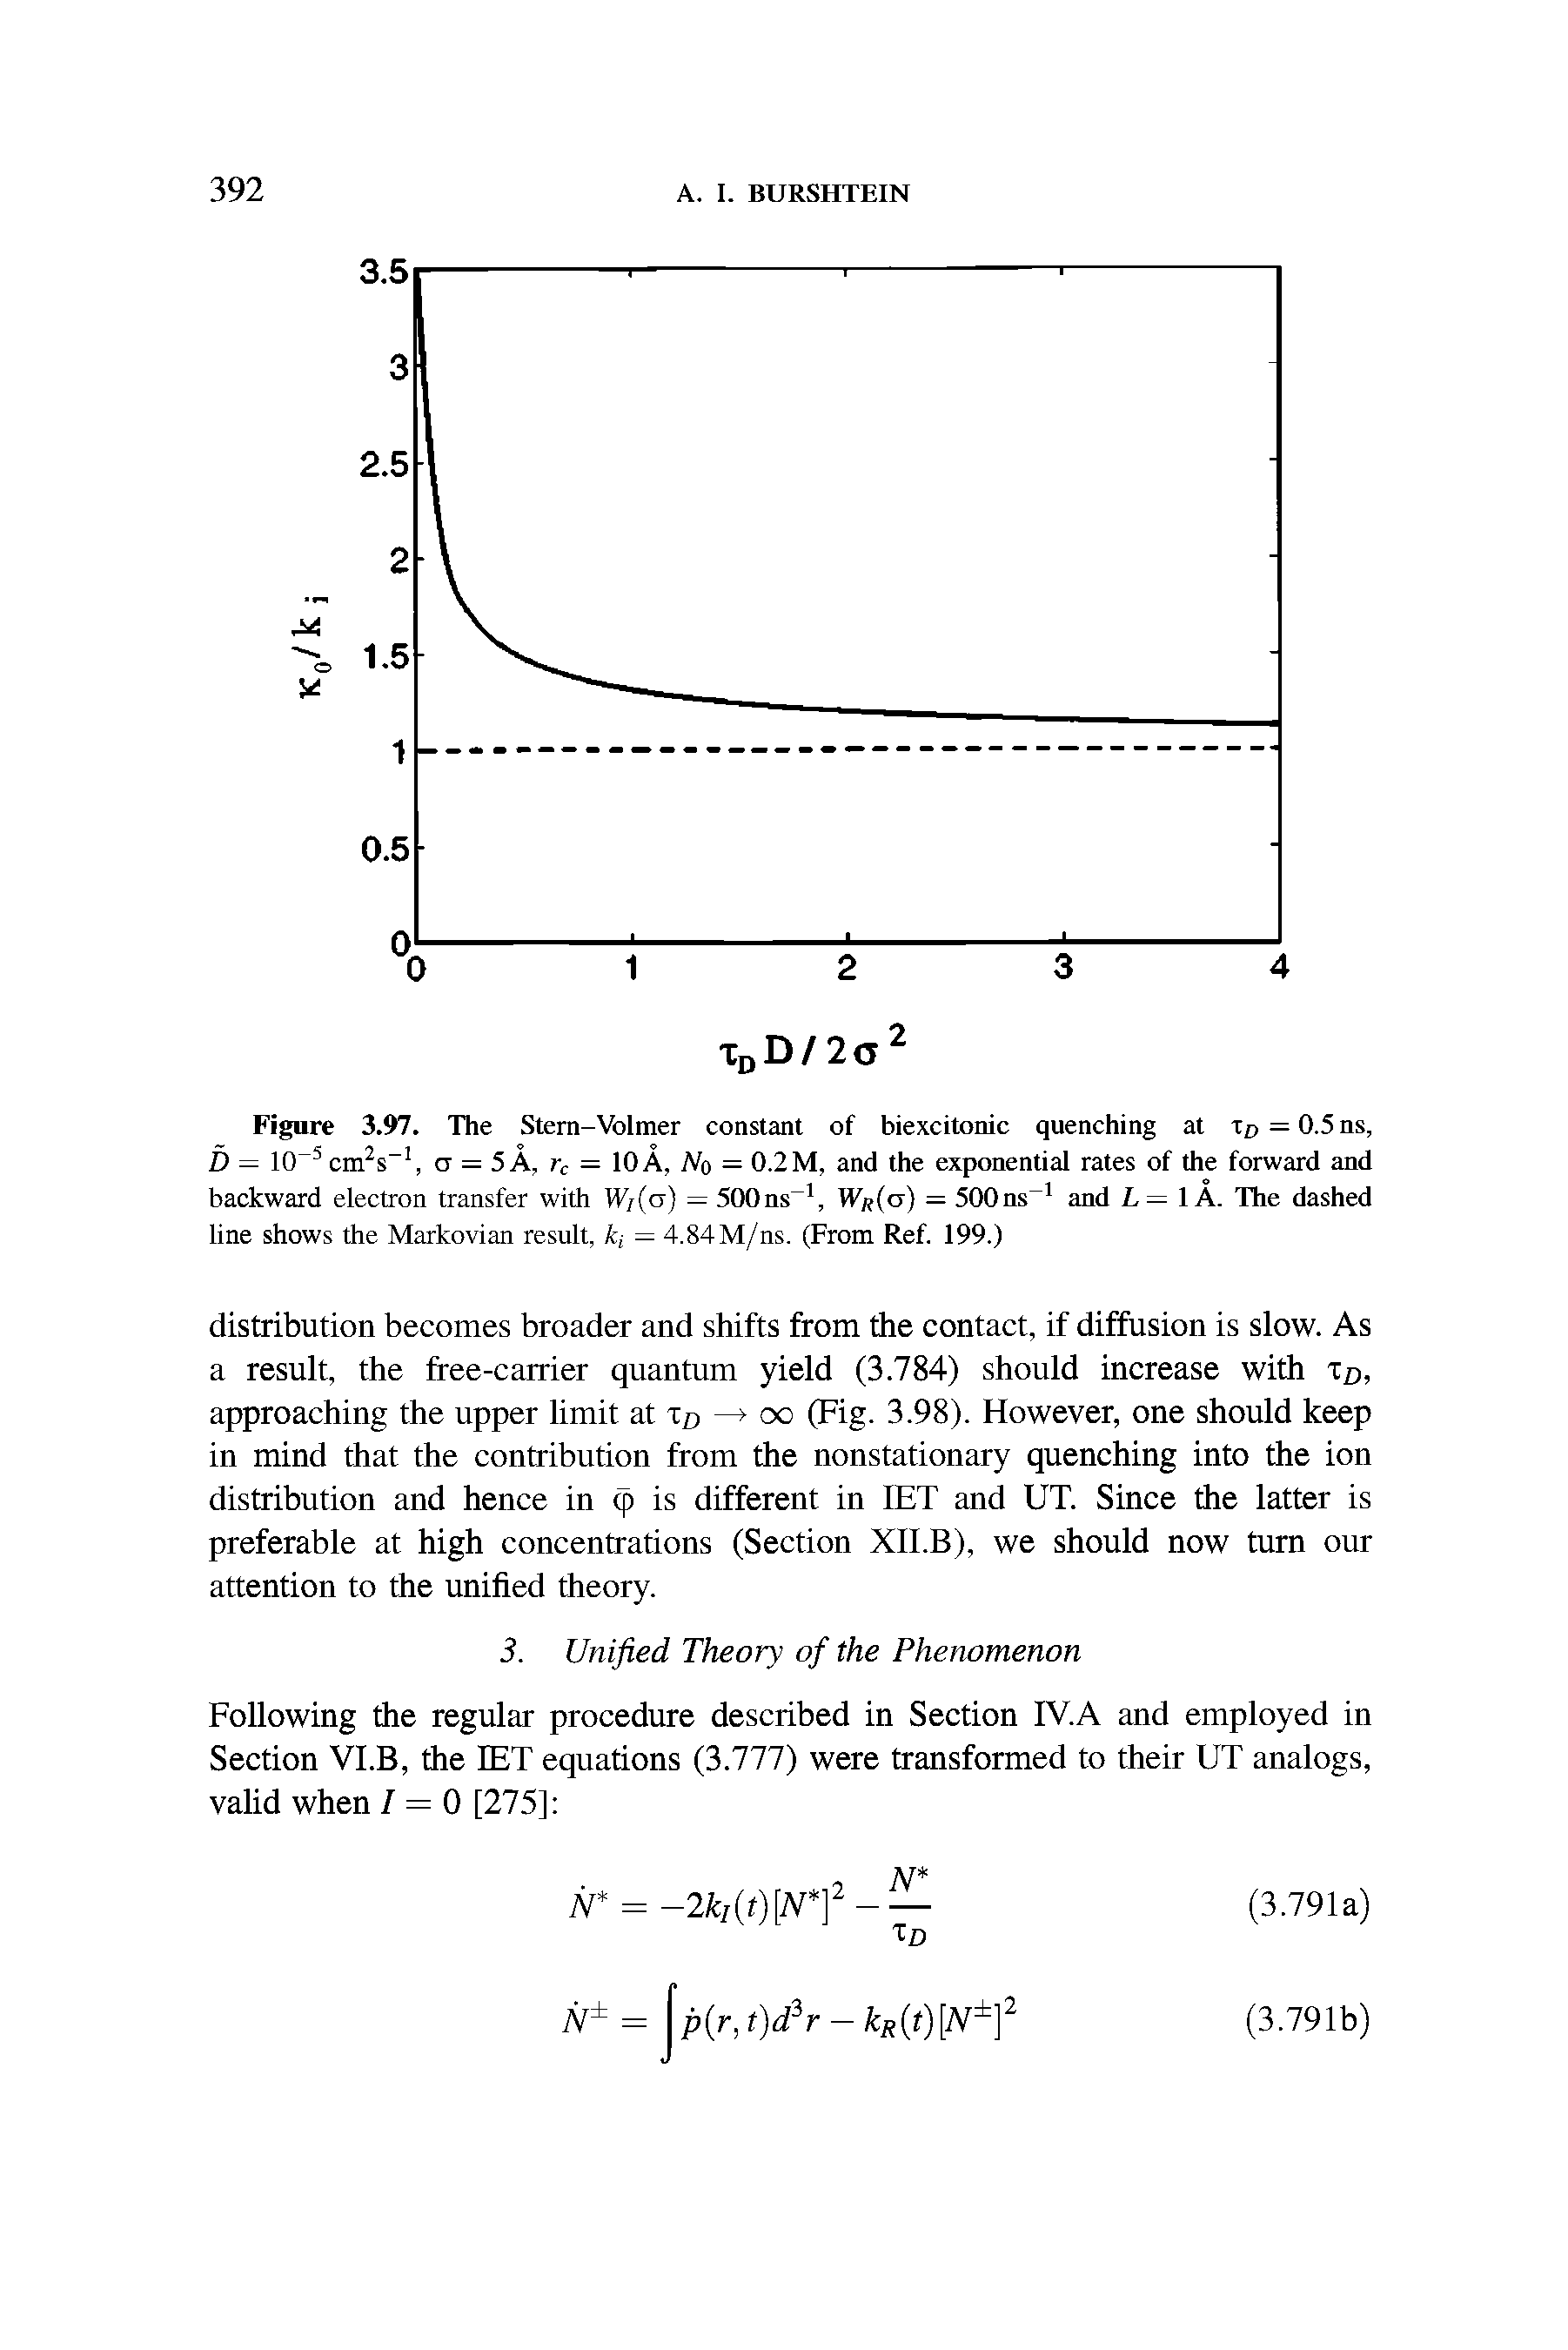 Figure 3.97. The Stern-Volmer constant of biexcitonic quenching at xD = 0.5 ns, D — 10 5 cm2s 1, ct = 5 A, rc = 10A, No = 0.2M, and the exponential rates of the forward and backward electron transfer with W/(a) = 500ns, W/ (cf) = 500ns and L= 1A. The dashed line shows the Markovian result, = 4.84M/ns. (From Ref. 199.)...